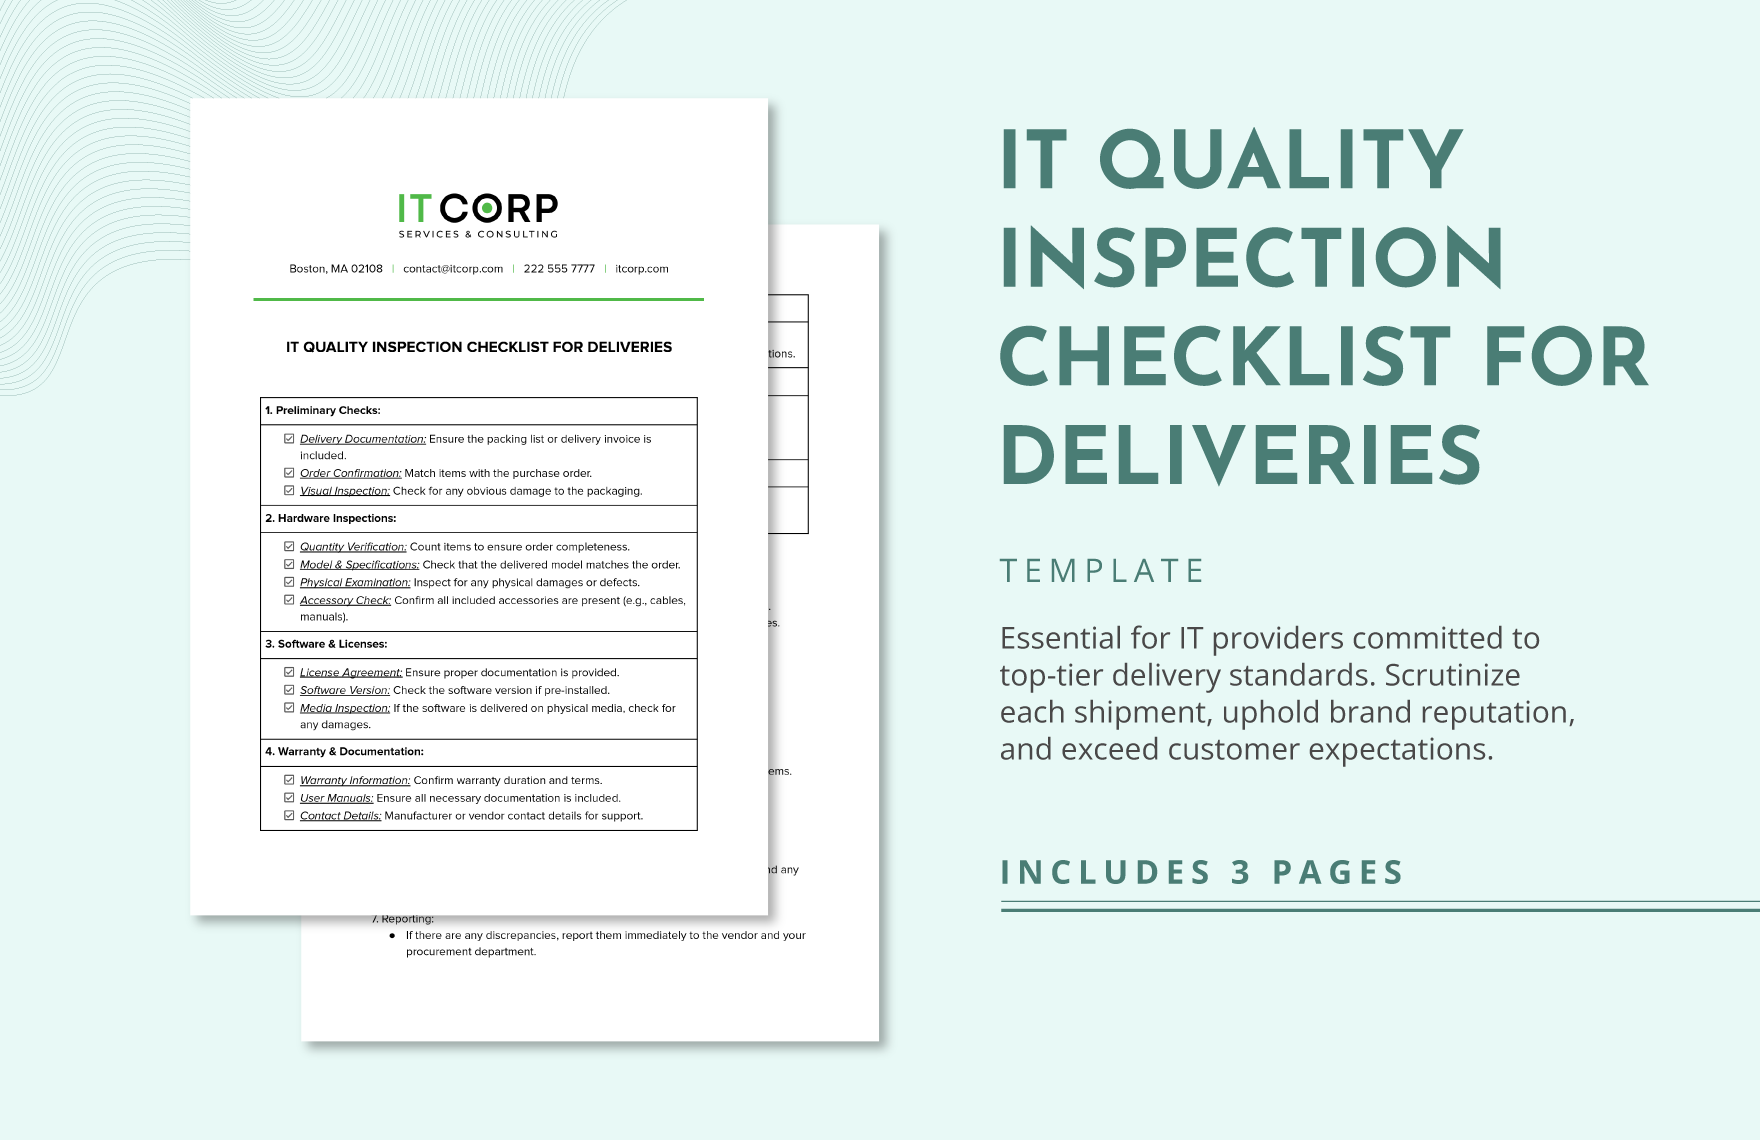 IT Quality Inspection Checklist for Deliveries Template